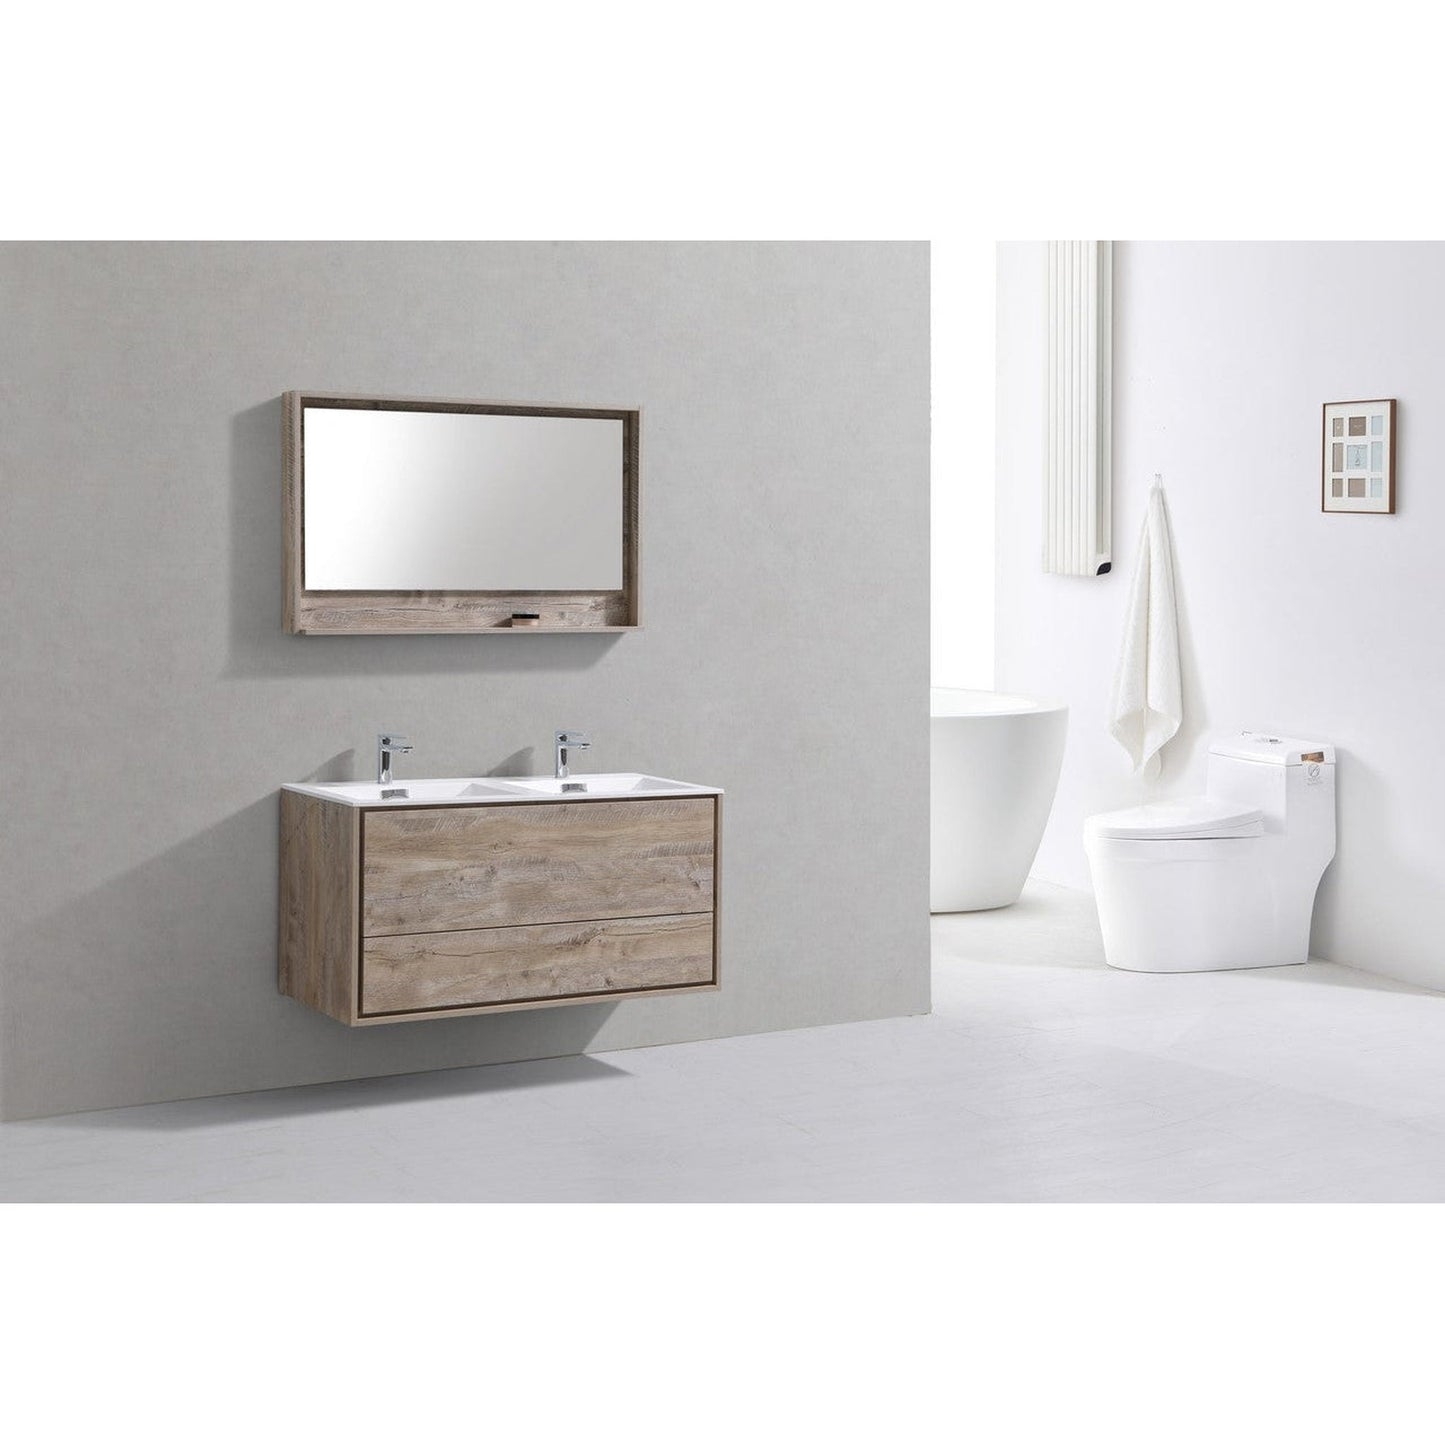 KubeBath DeLusso 48" Nature Wood Wall-Mounted Modern Bathroom Vanity With Double Integrated Acrylic Sink With Overflow And 48" Wood Framed Mirror With Shelf